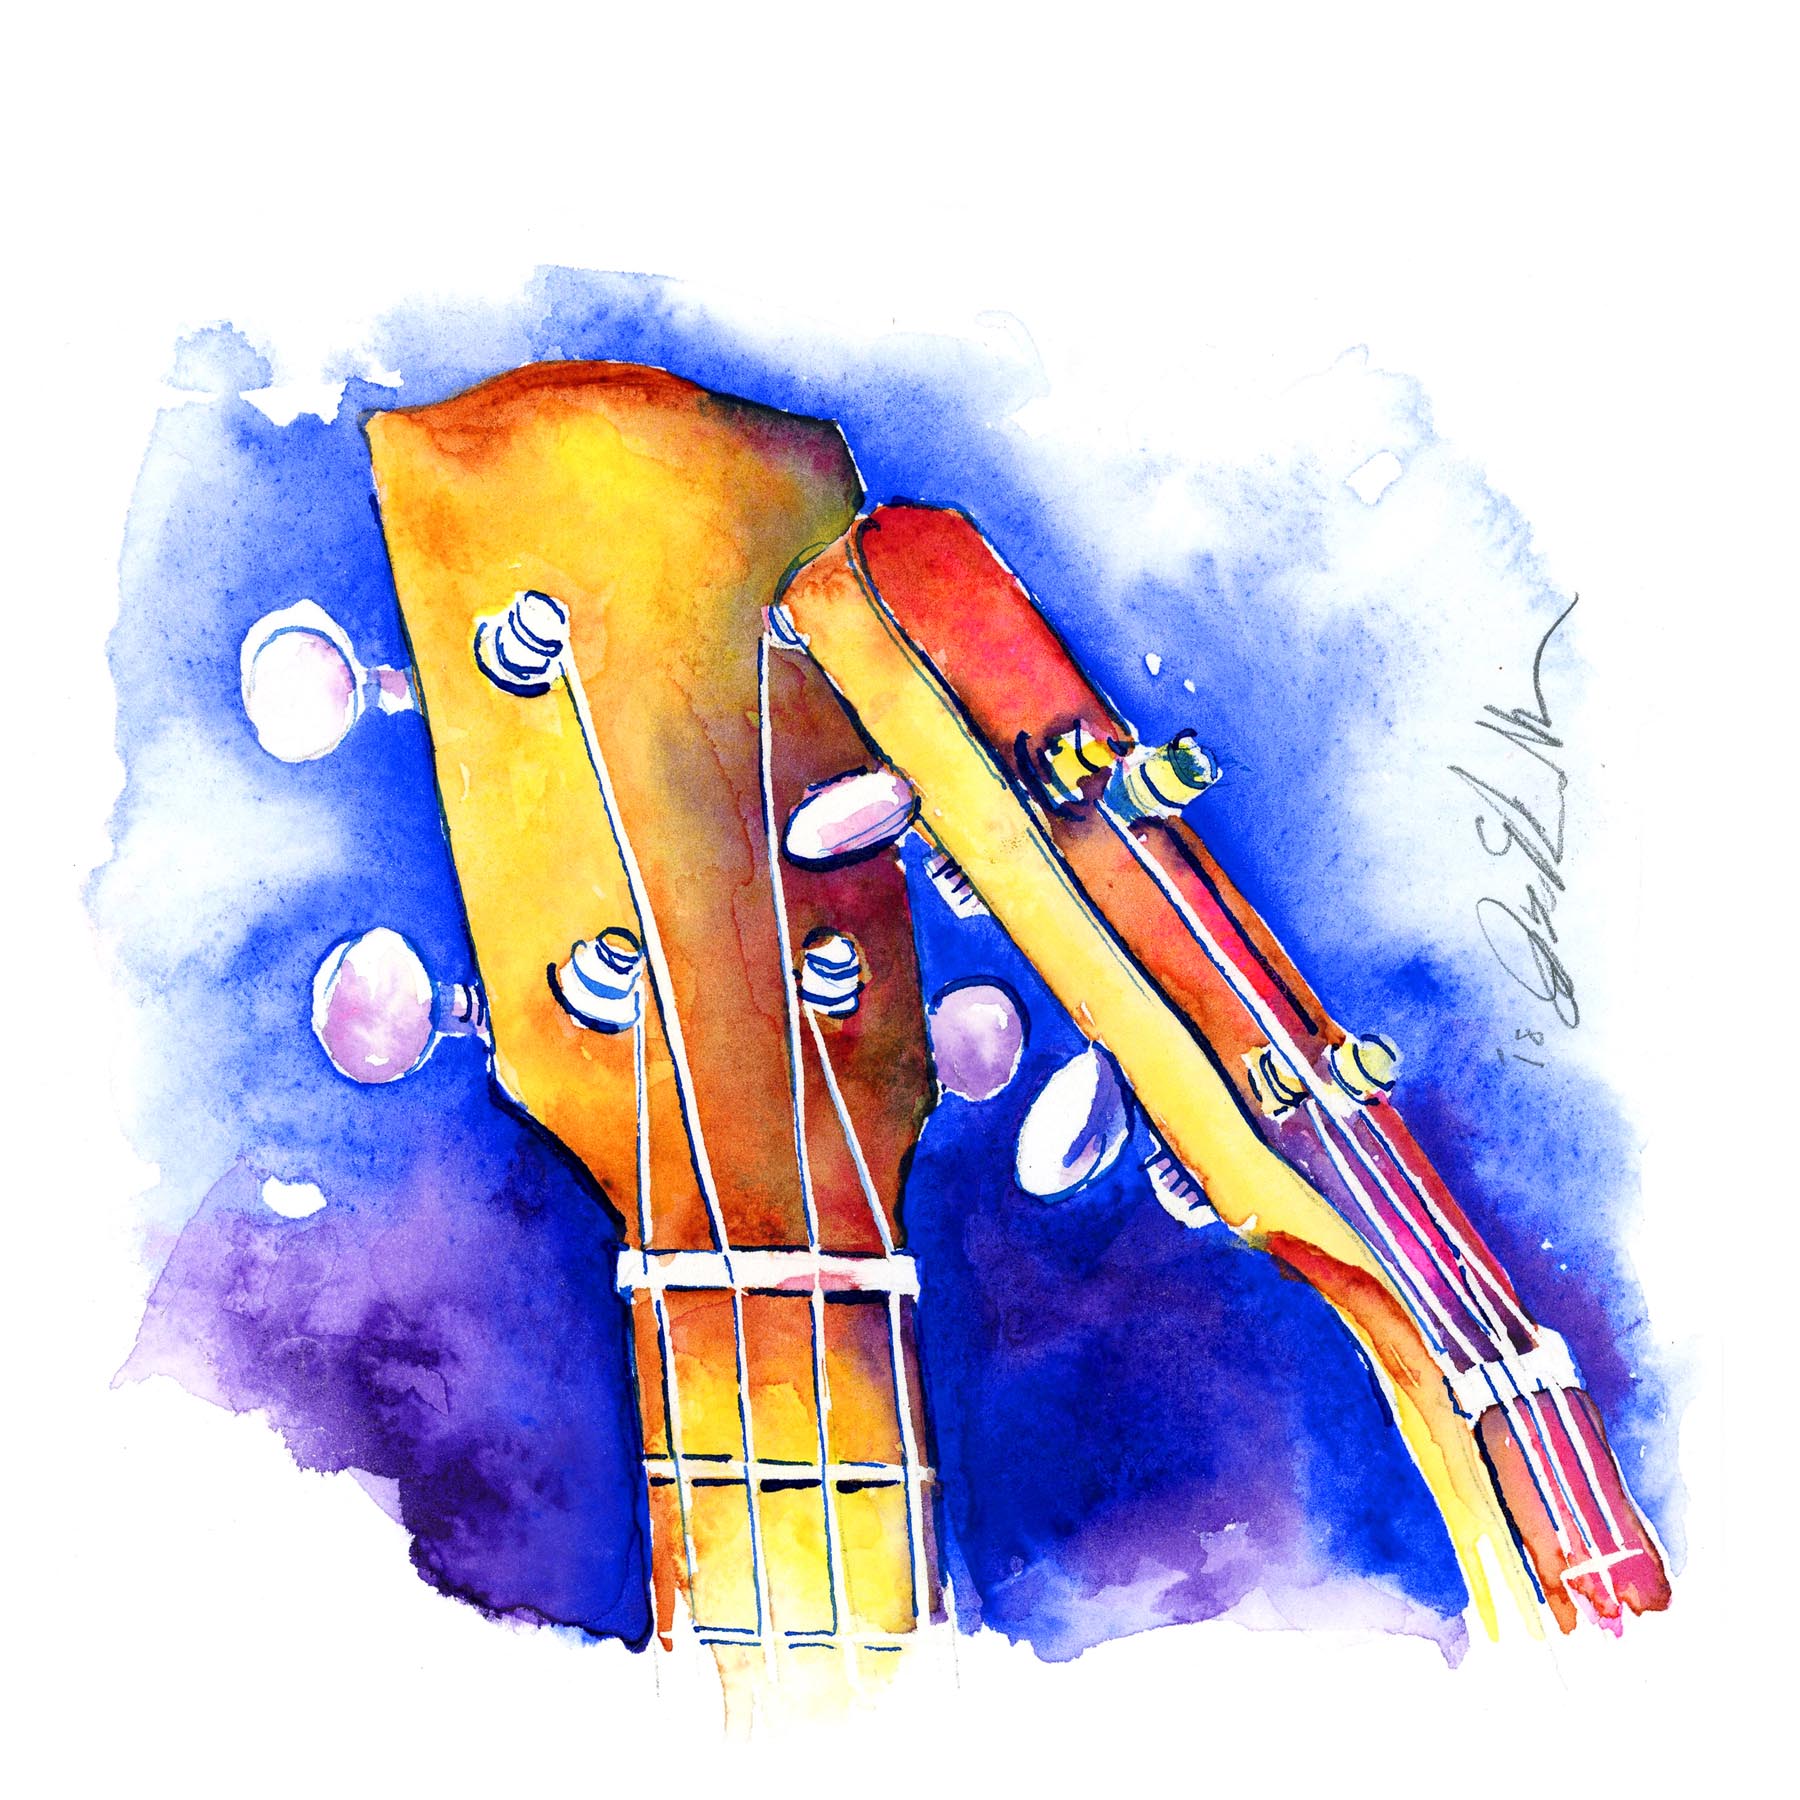 Brightly colored watercolor of a musical instrument in watercolor